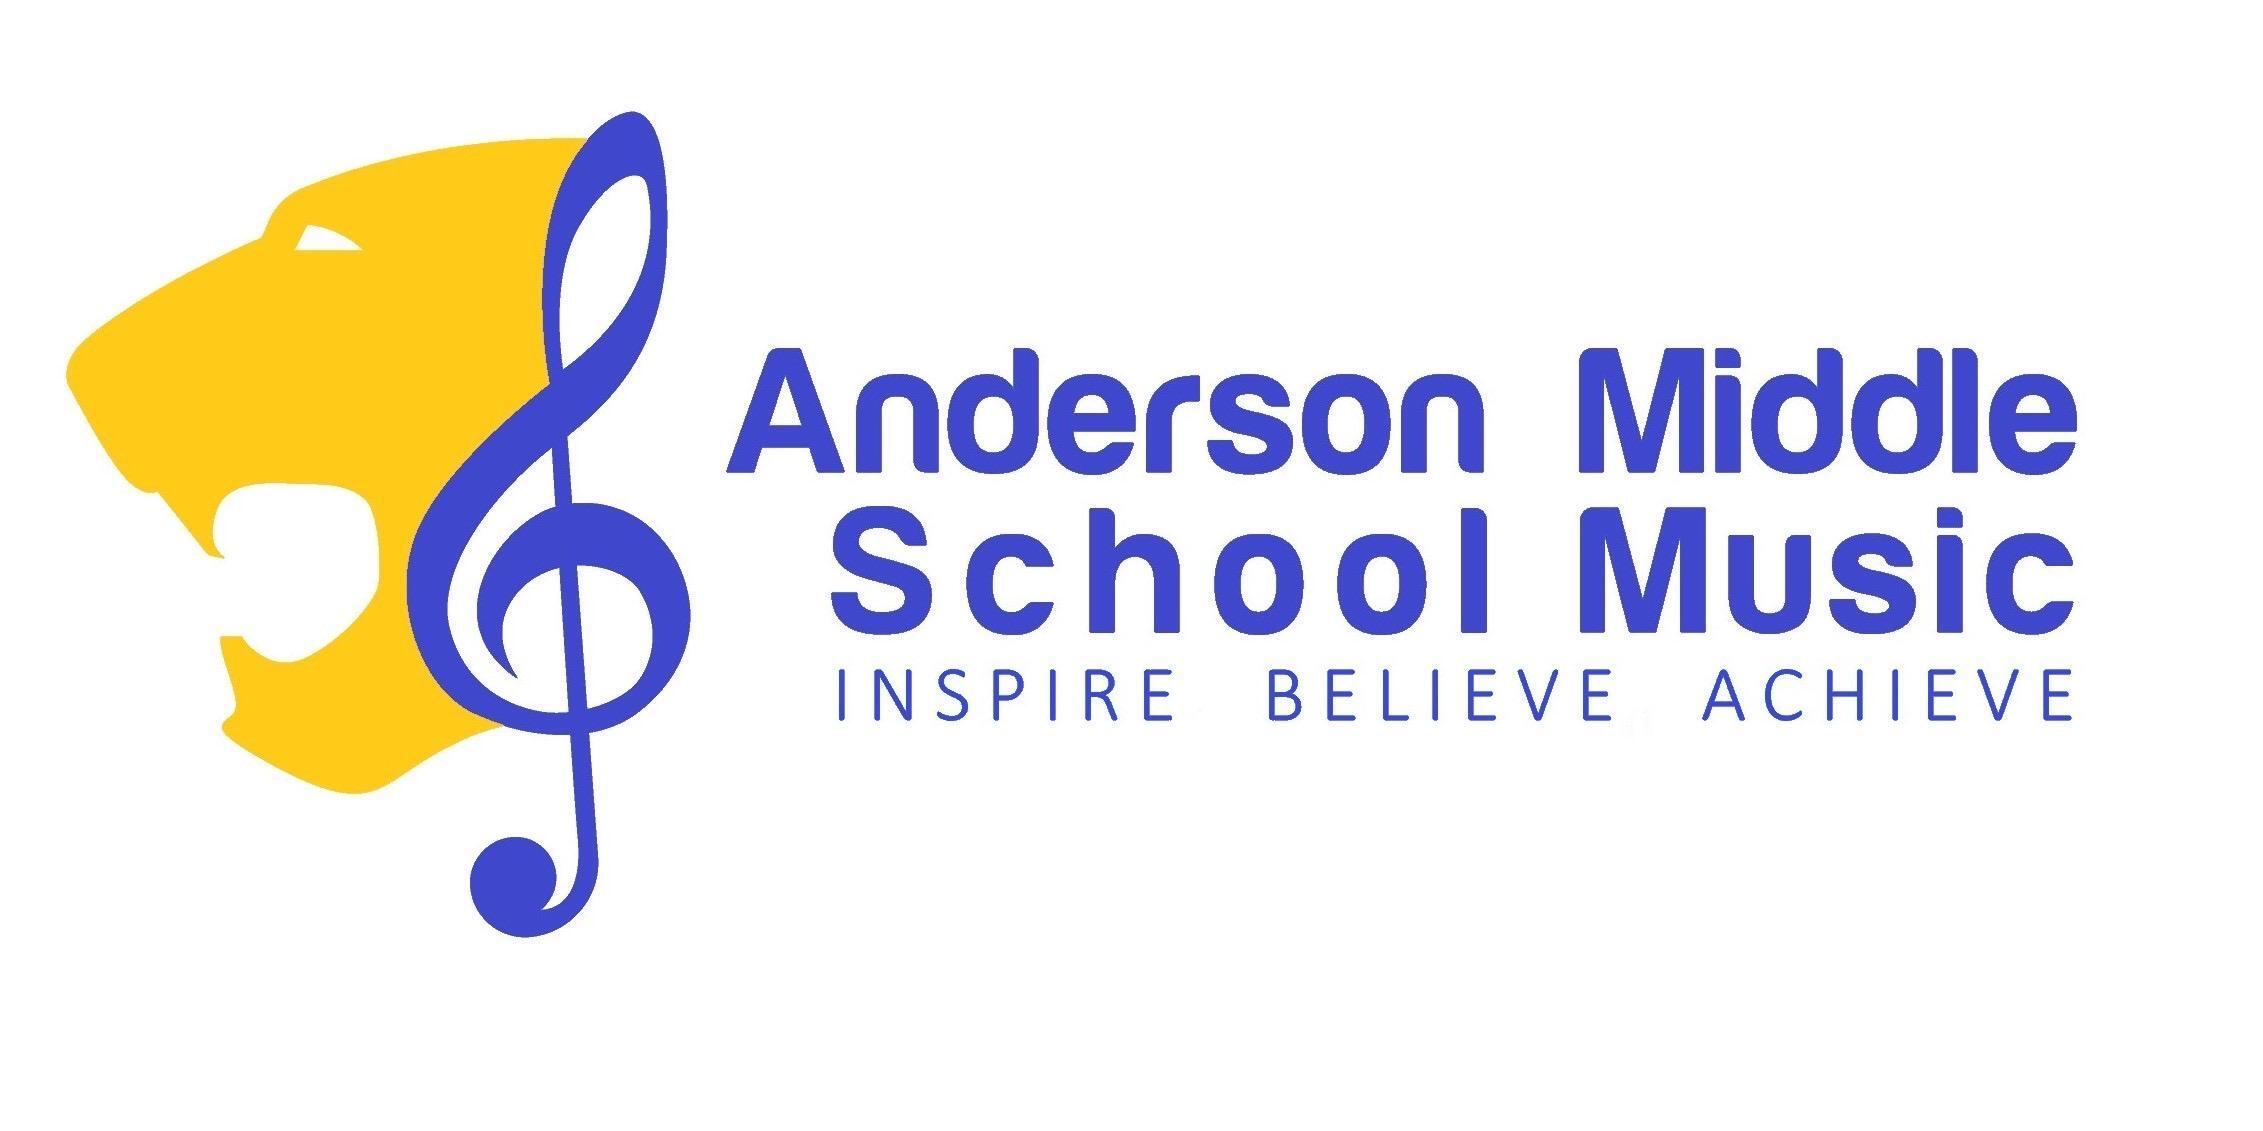 Anderson Middle School Band logo